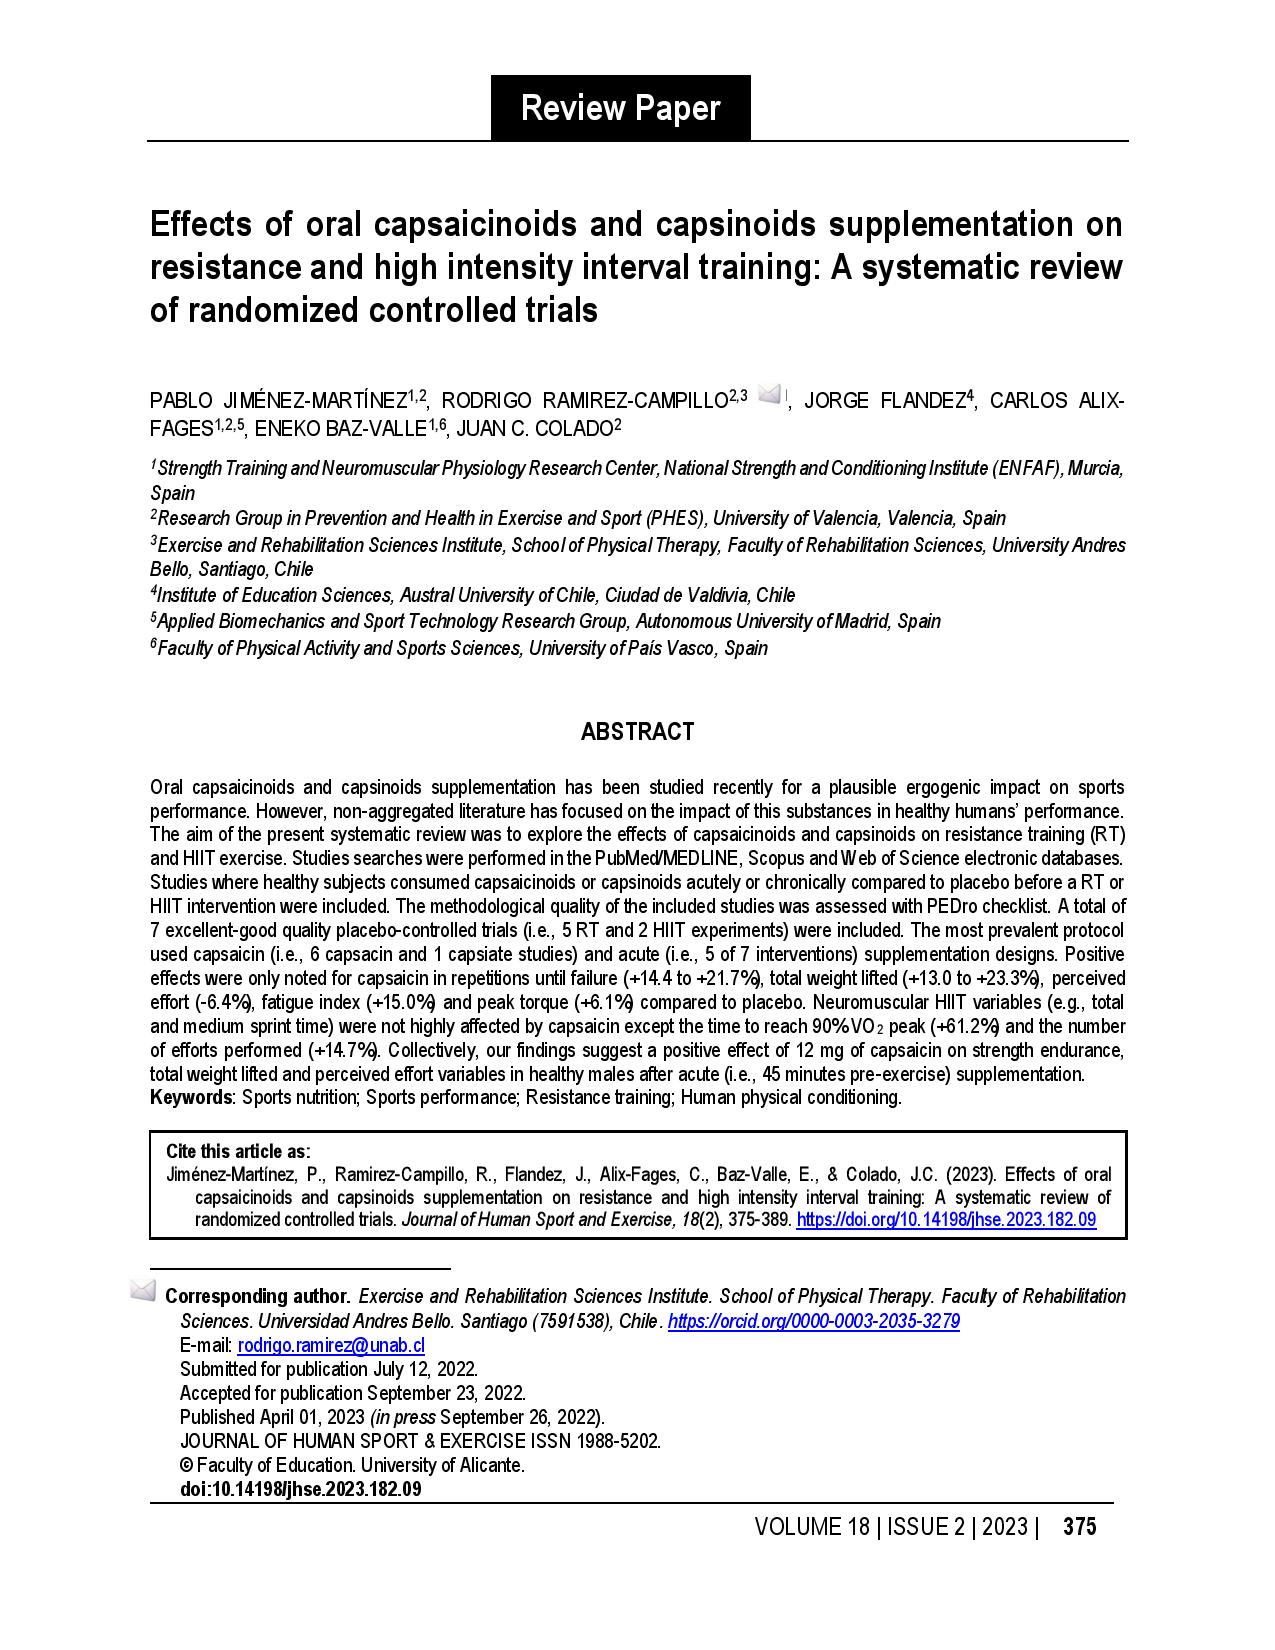 Effects of oral capsaicinoids and capsinoids supplementation on resistance and high intensity interval training: A systematic review of randomized controlled trials